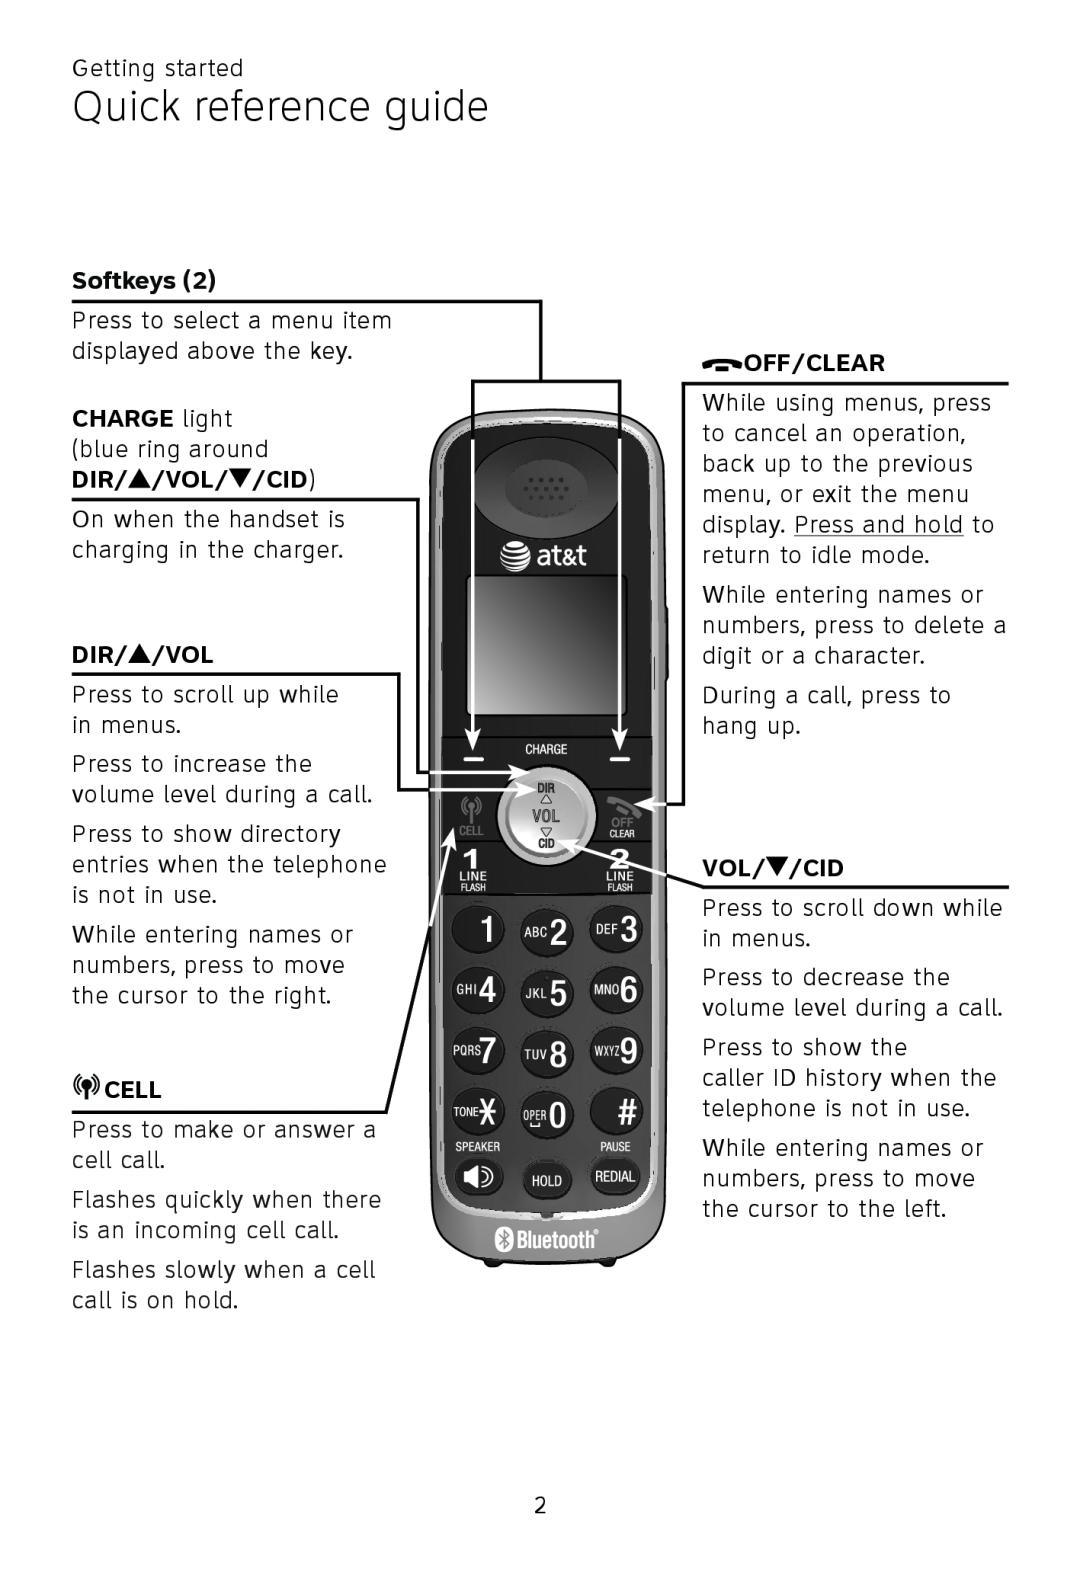 AT&T TL86109 Quick reference guide, Softkeys, Dir//Vol, Cell, Press to make or answer a cell call, Off/Clear, Vol//Cid 